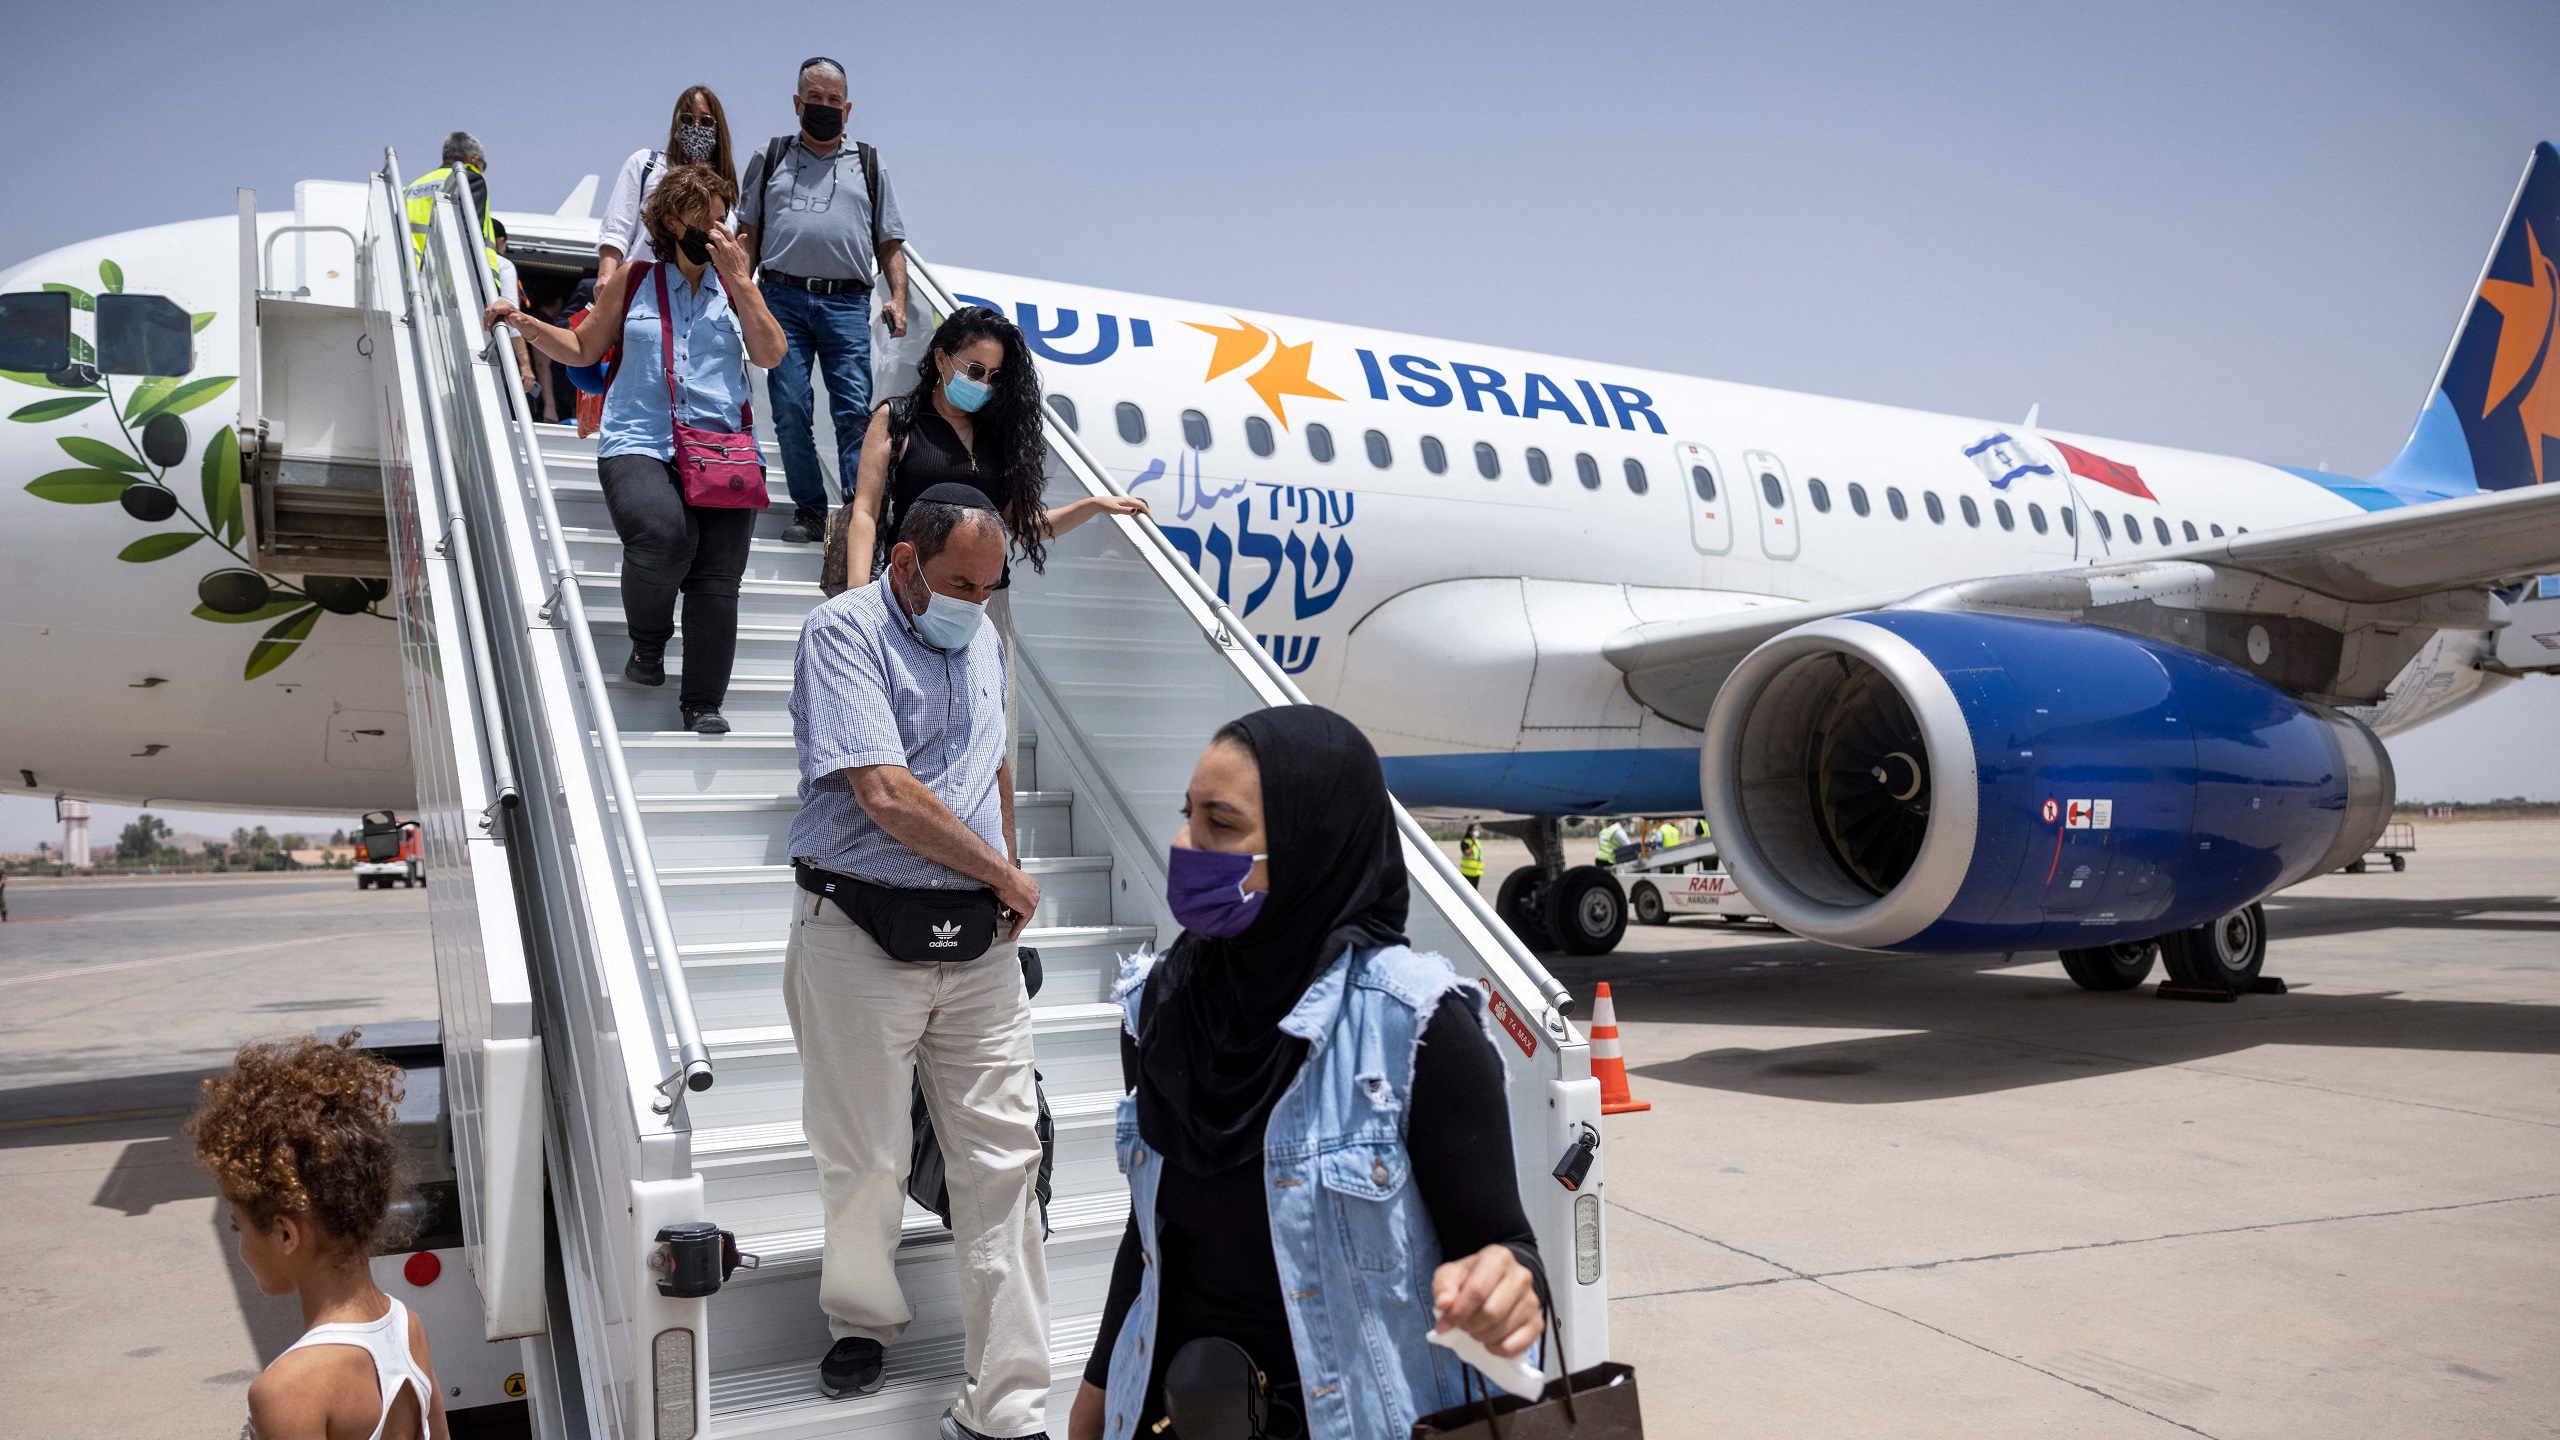 200,000 Israelis Tourists Expected To Visit Morocco This Year